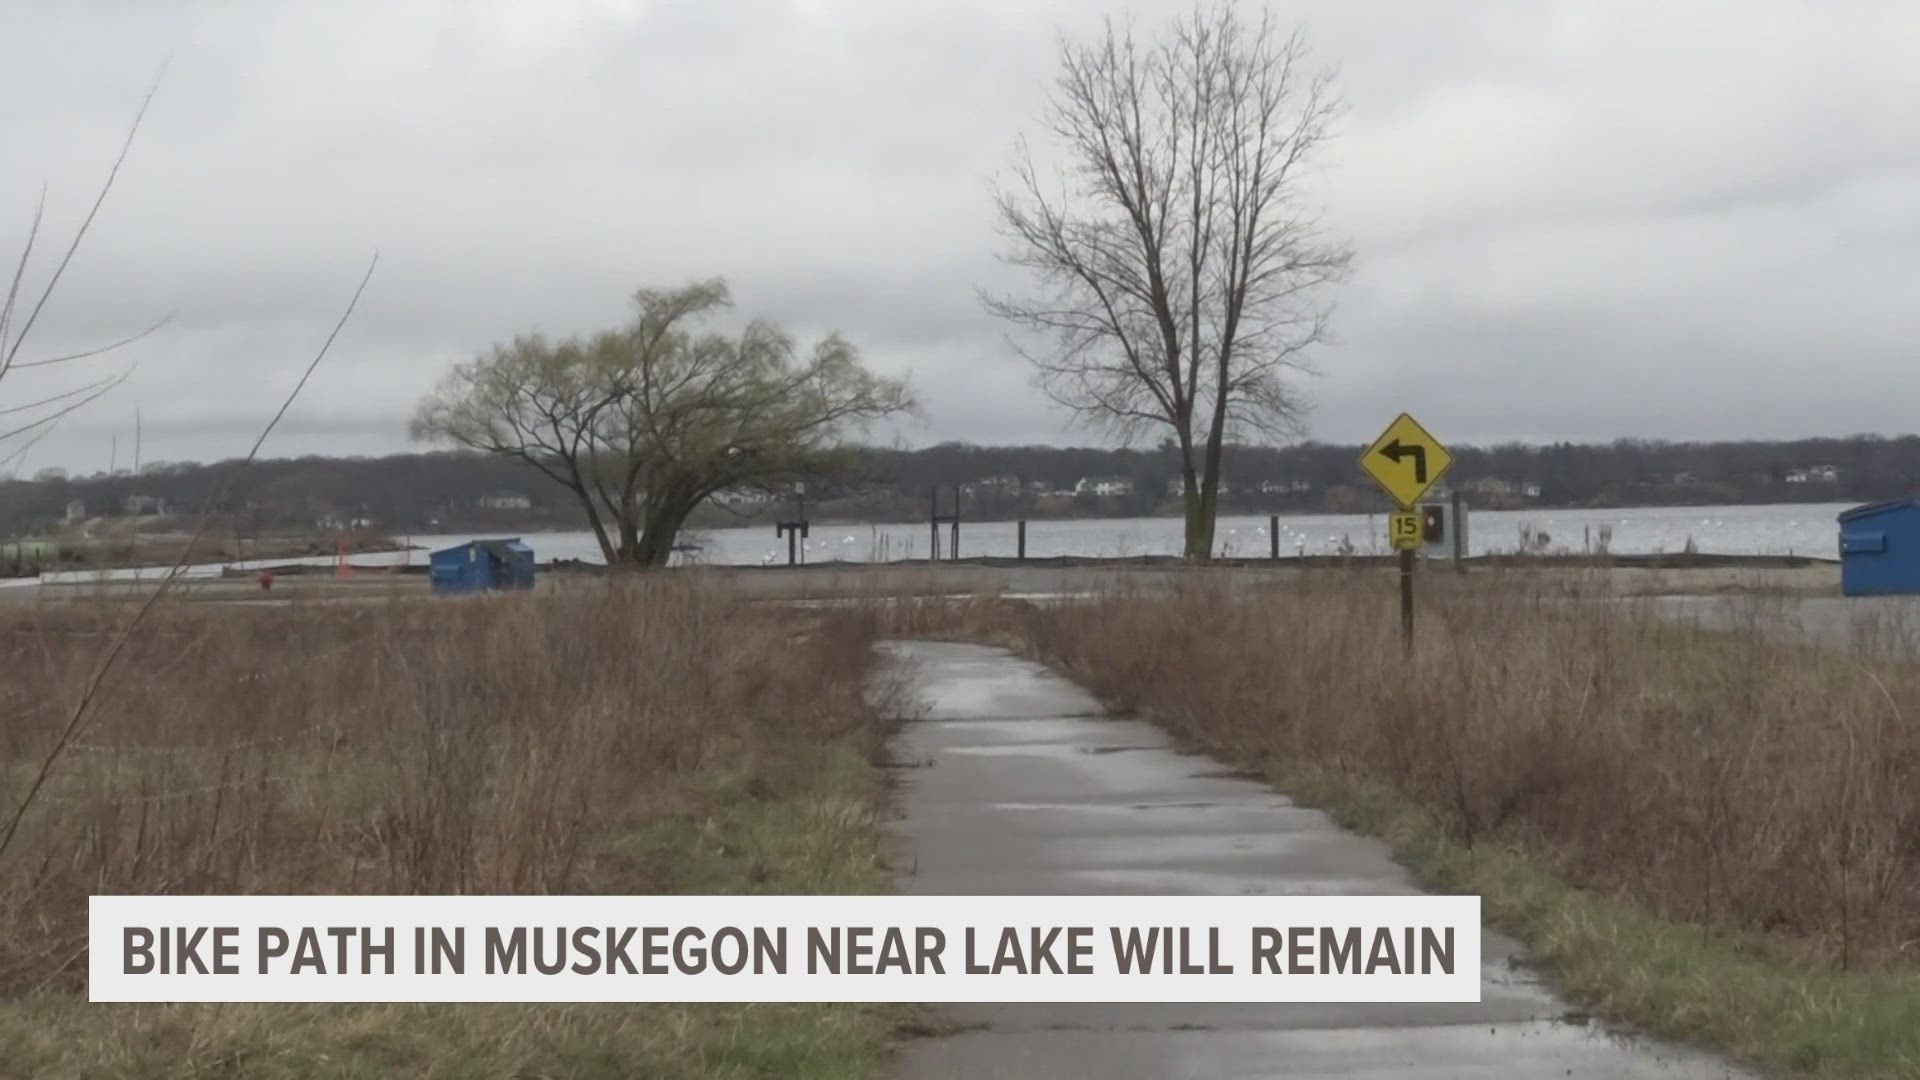 A big construction project in Muskegon is sparking controversy over a bike path.